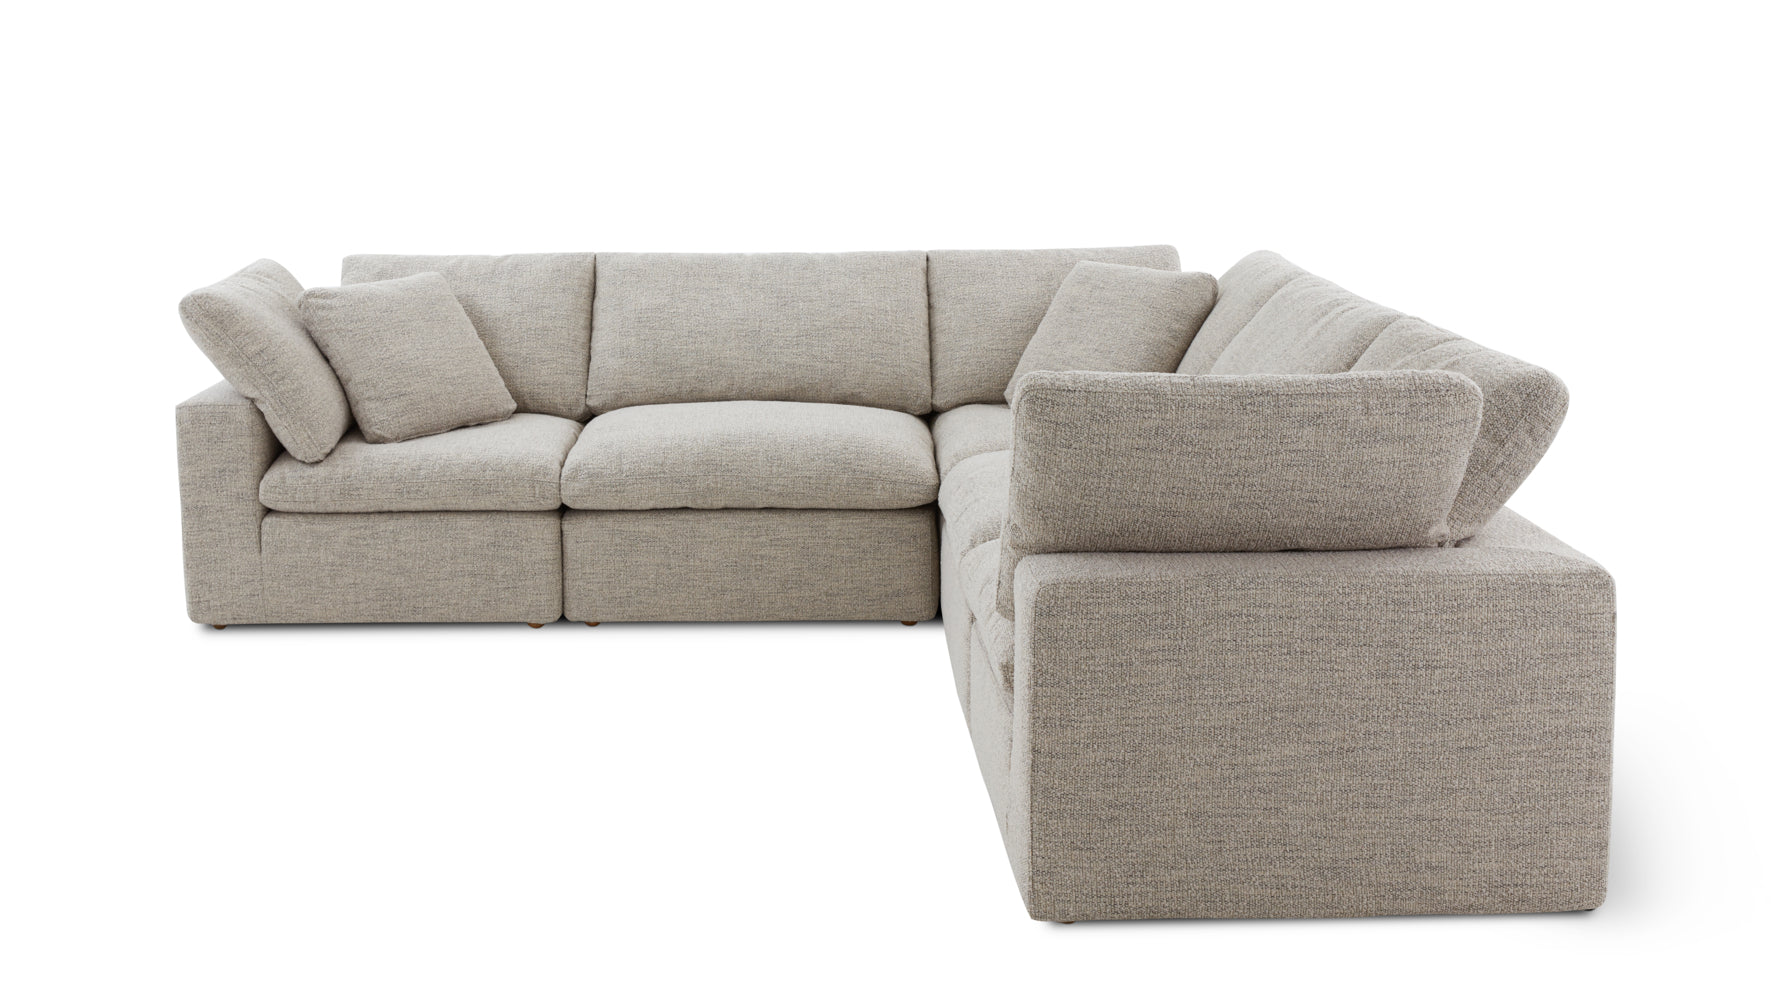 Movie Night™ 5-Piece Modular Sectional Closed, Large, Oatmeal - Image 1